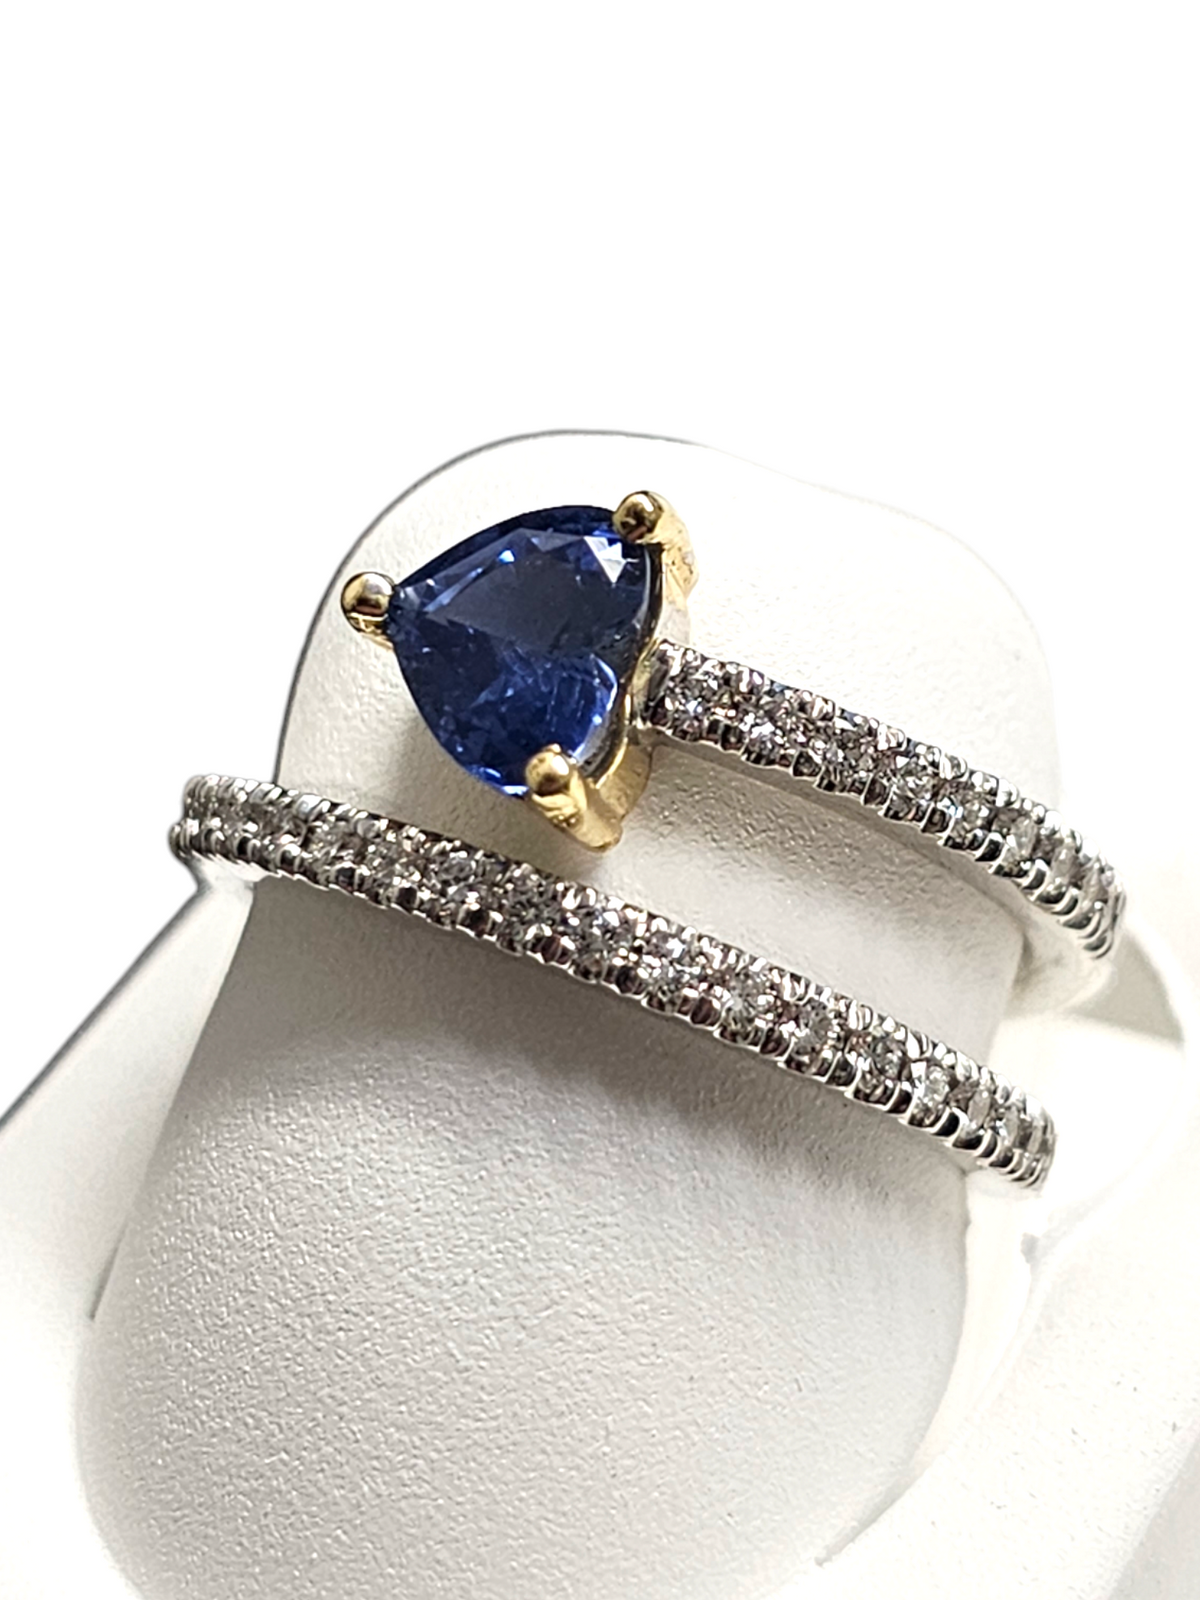 18Kt White Gold Blue Sapphire and Diamond Ladies Ring